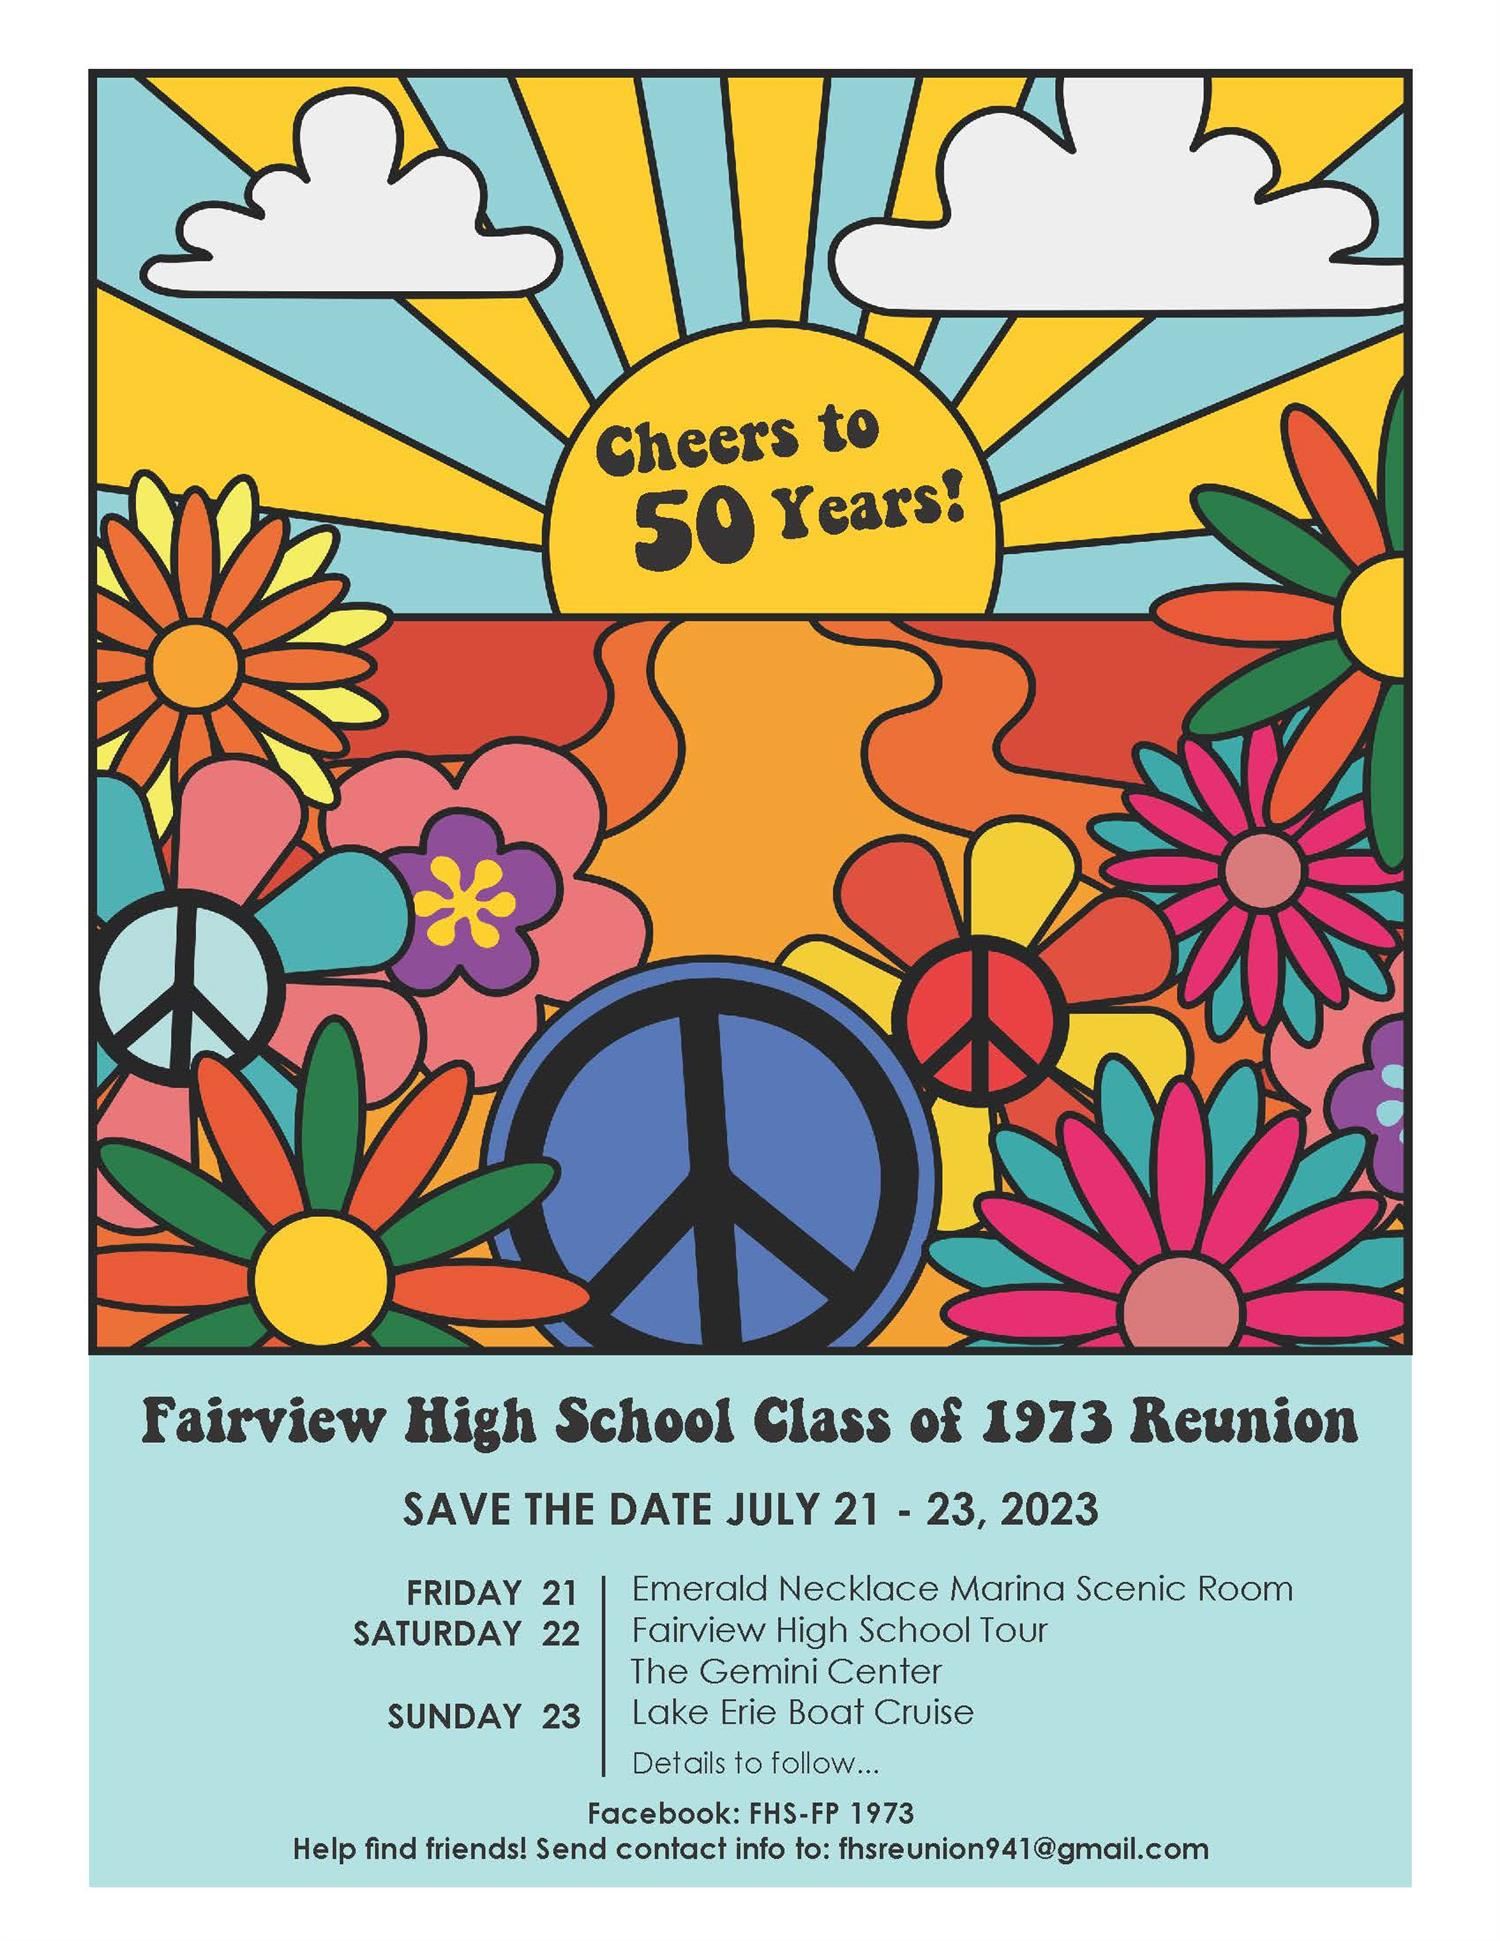  FHS Class of 1973 Reunion - Cheers to 50 Years